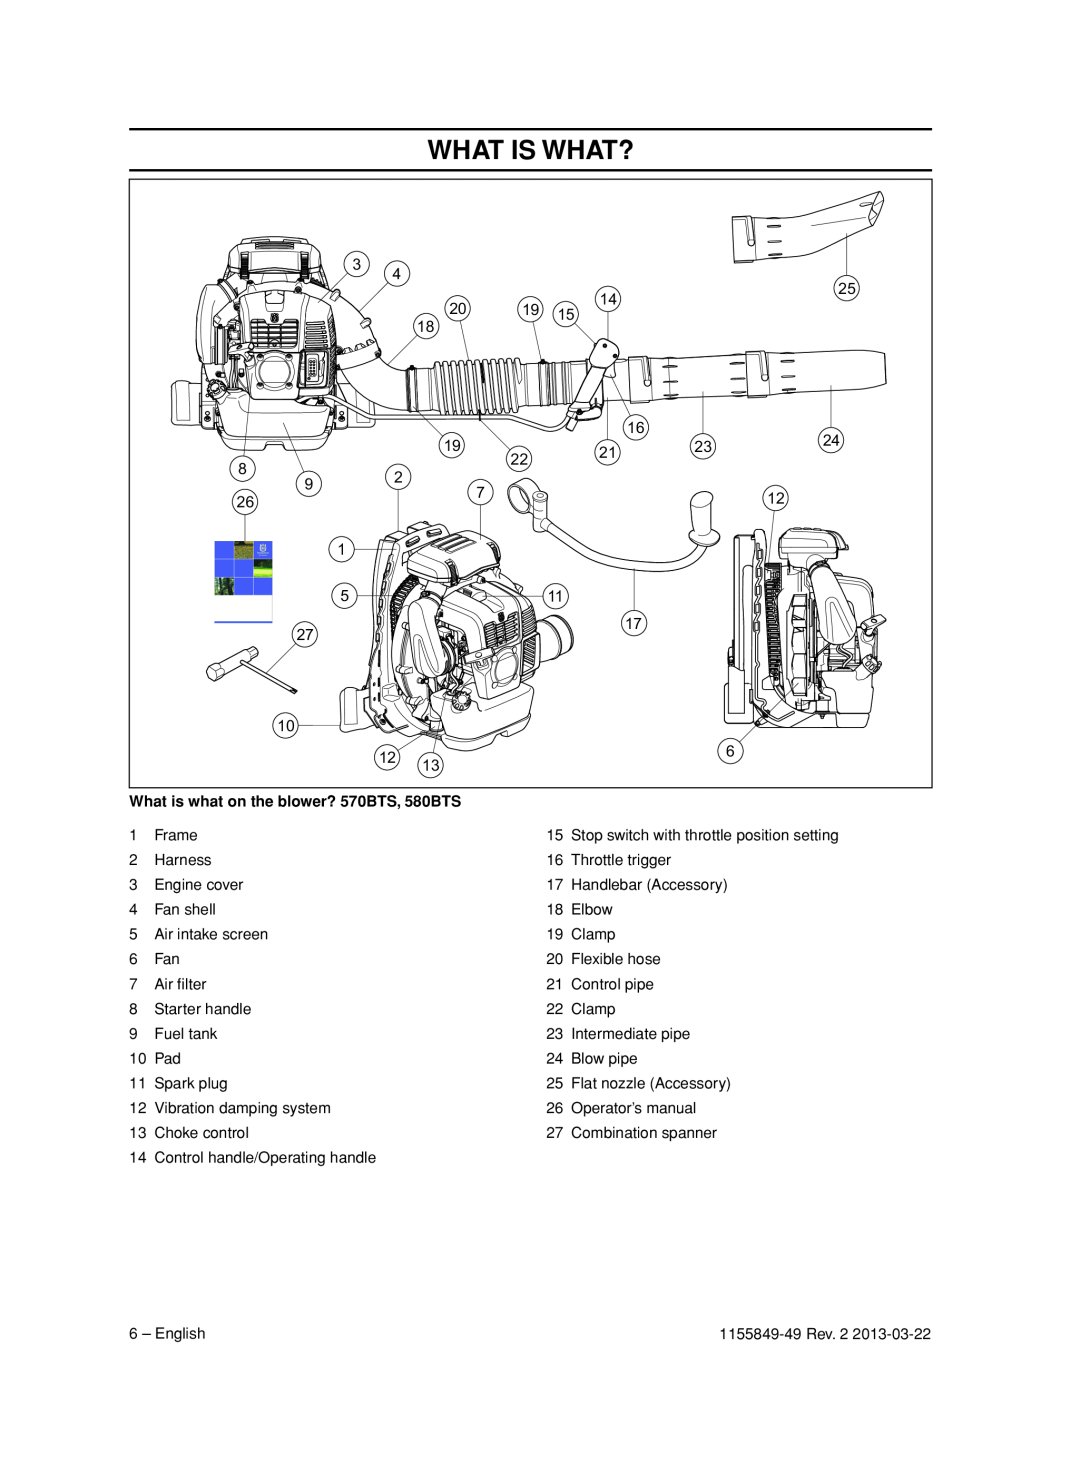 Husqvarna 966629602, 966631102, 966629501, 966629402, 966629701 What Is What?, What is what on the blower? 570BTS, 580BTS 